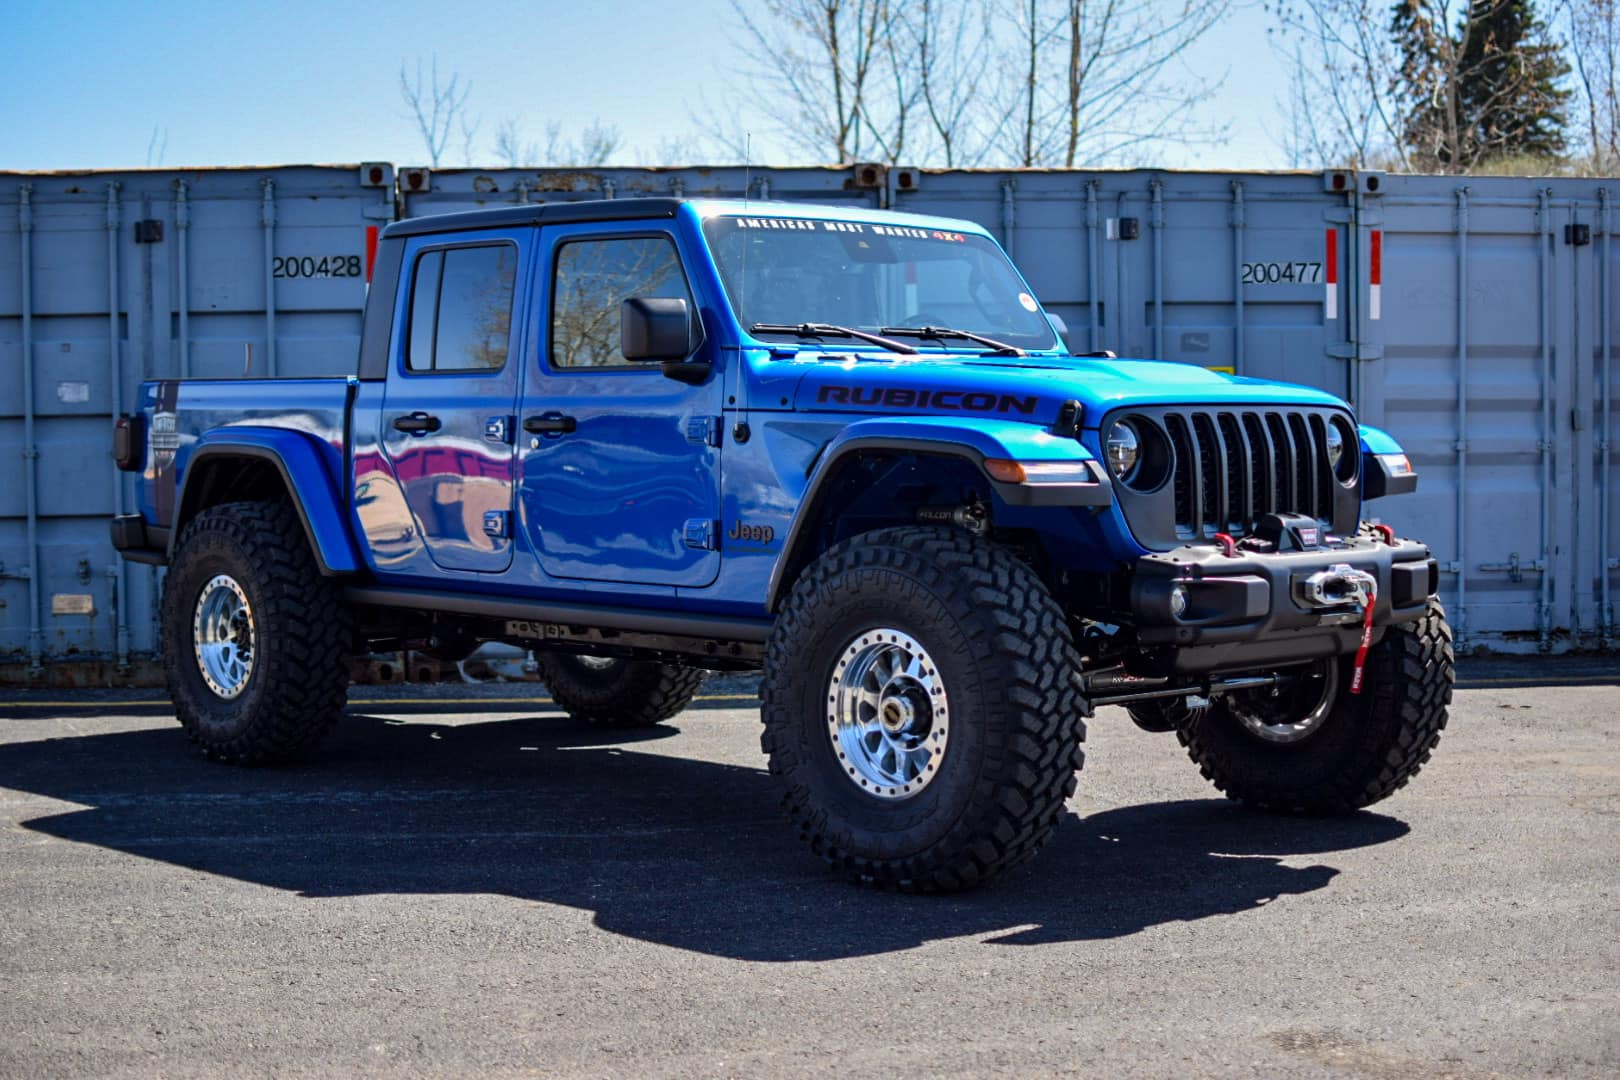 HellcatSwapped Jeep Gladiator Looks Great With 40” Tires, Hydro Blue